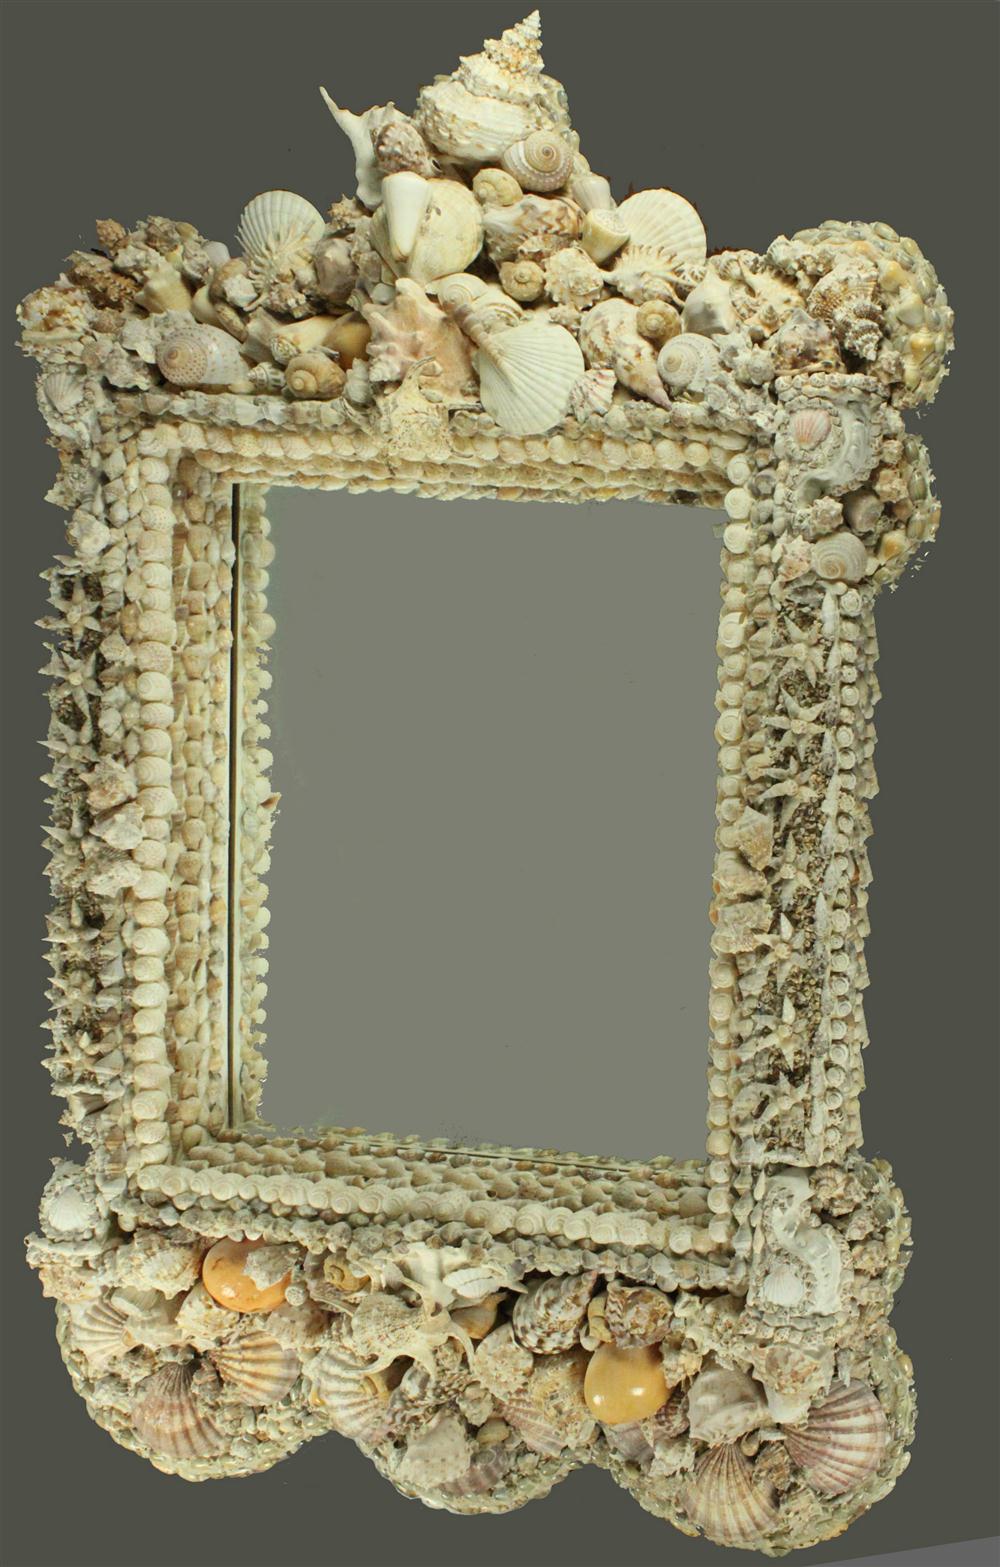 MONUMENTAL NATURAL SHELL ENCRUSTED 146382